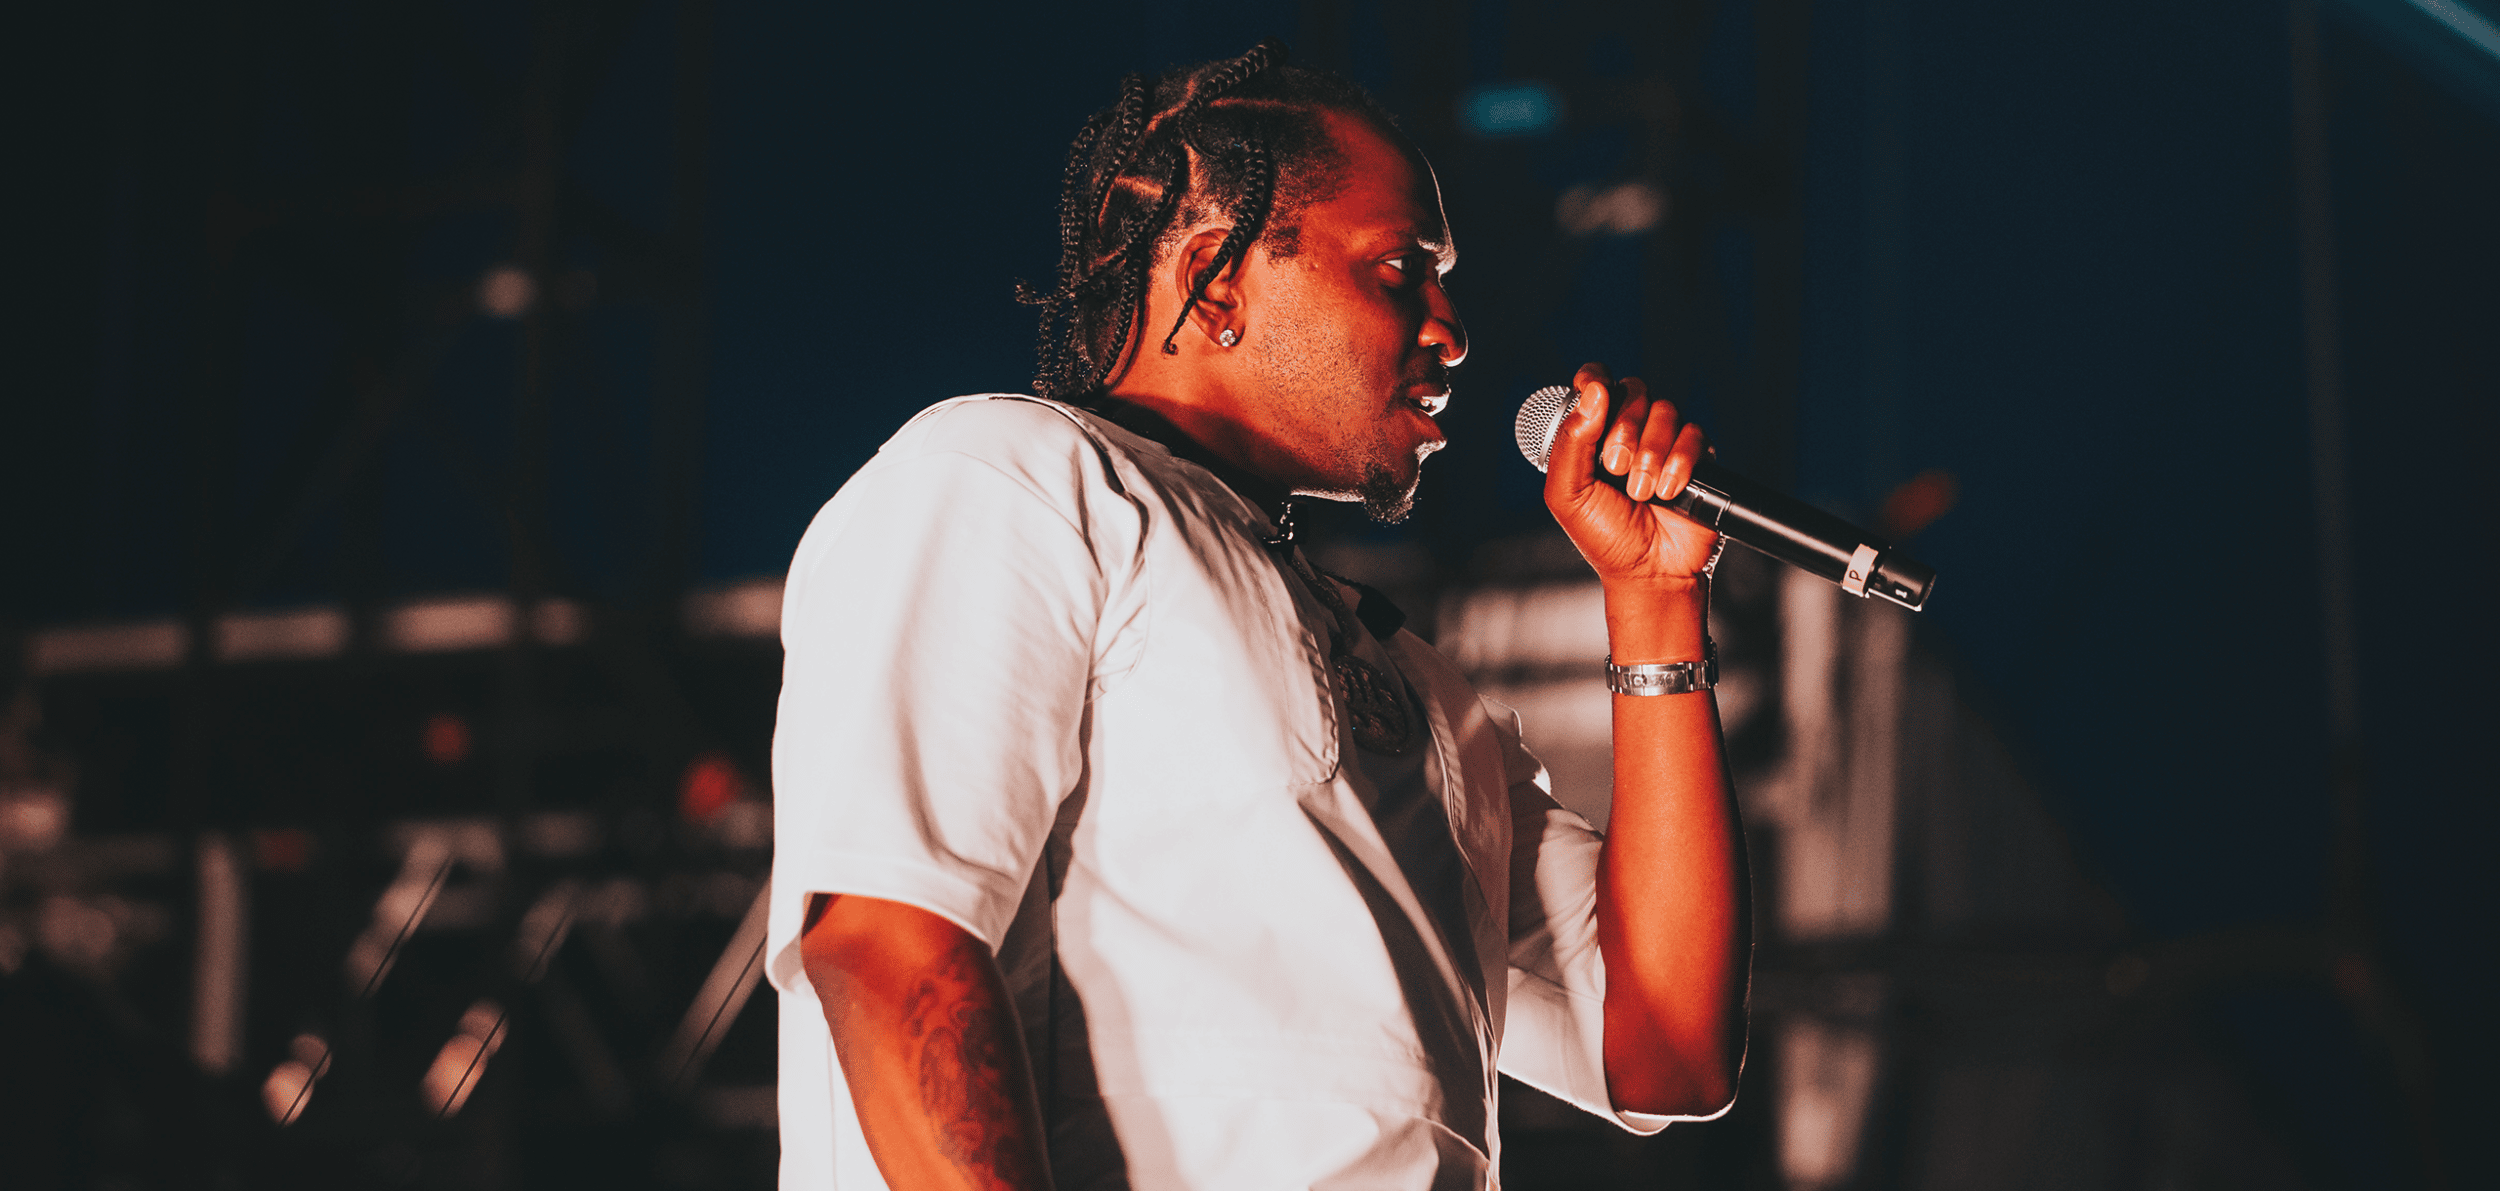 Pusha performing on stage at the Rooftop at Pier 17